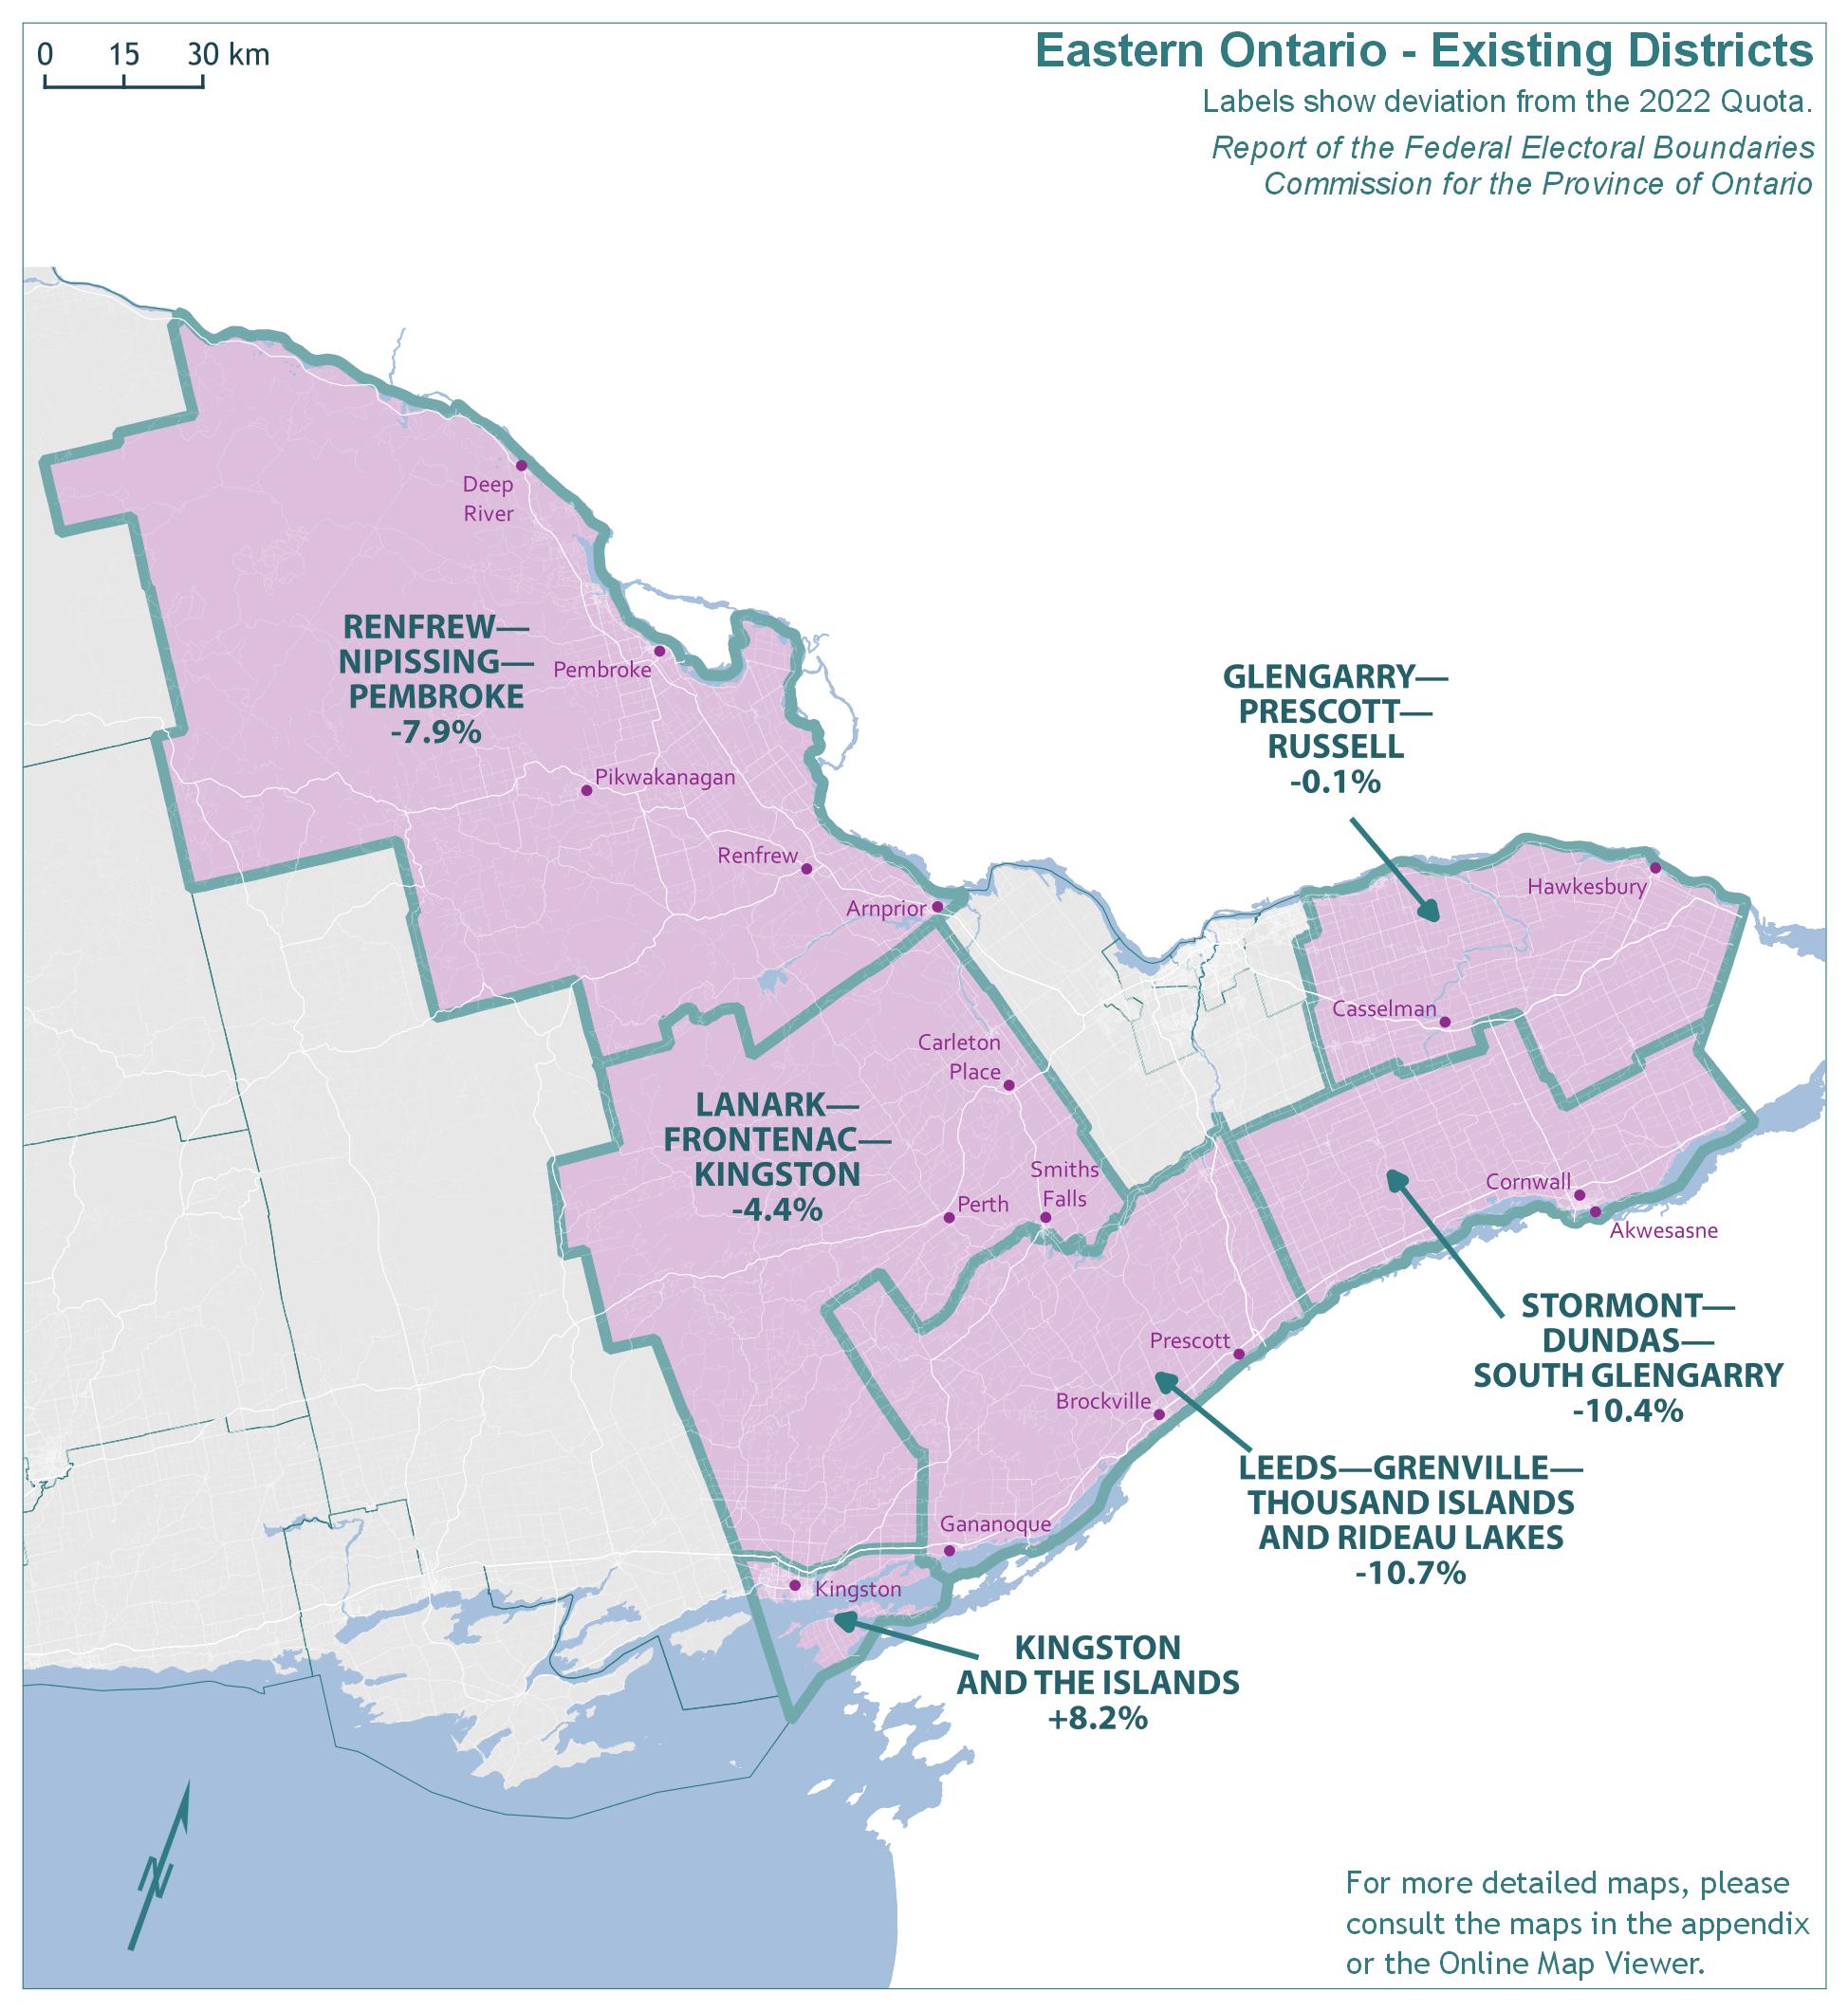 Eastern Ontario - Existing Districts